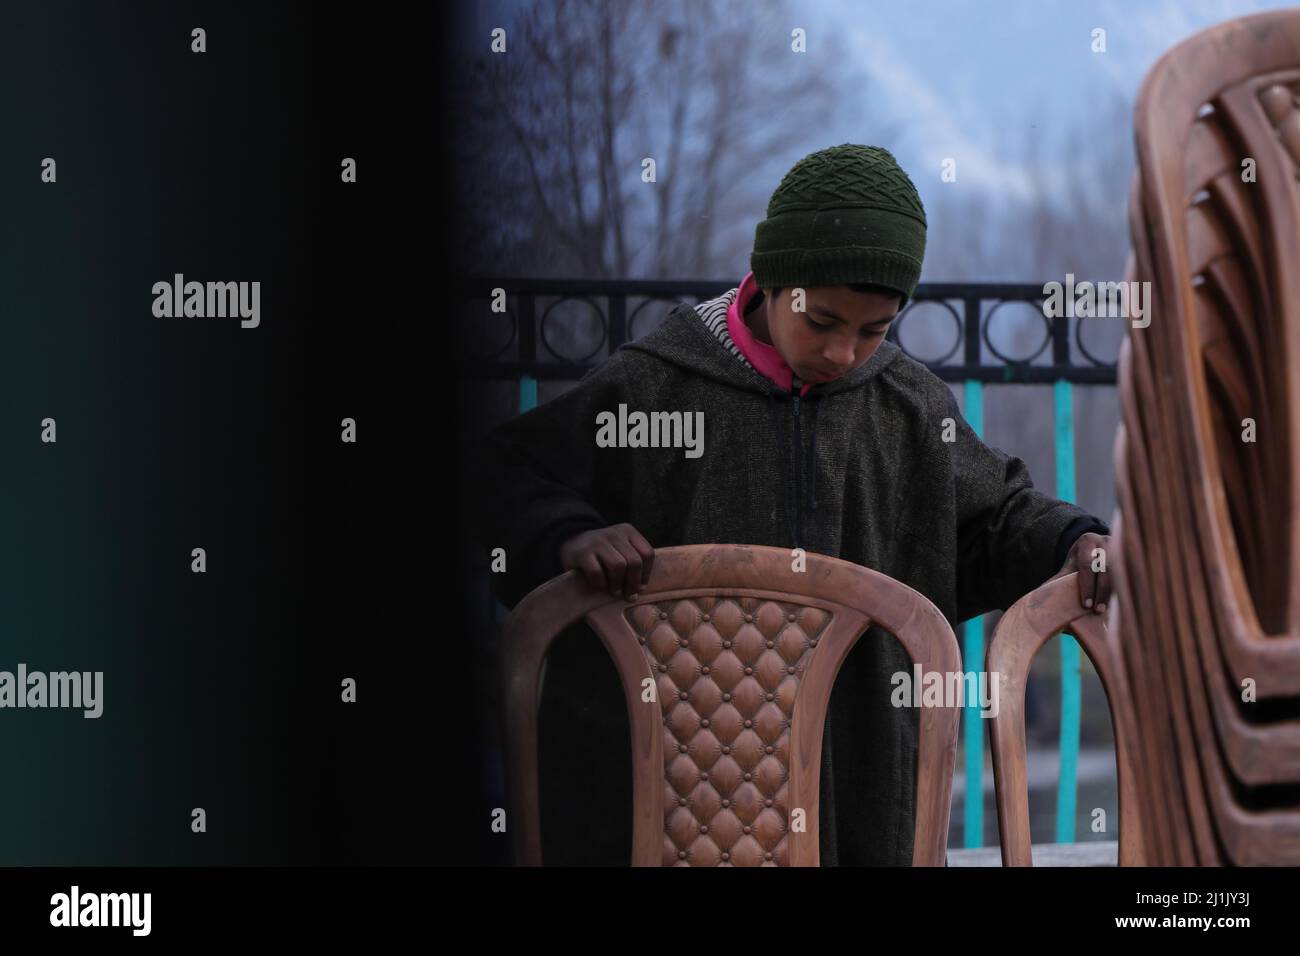 Srinagar, India. 26th Mar, 2022. A child places chairs at a roadside hotel in Srinagar on March 26, 2022. According to a 2018 report by the International Labour Organization (ILO), the number of child labourers around the world fell from 246 million in 2000 to around 152 million in 2016. However, millions of children continue to be exploited for cheap labour, especially in countries such as India. (Photo by Adil Abass/Pacific Press) Credit: Pacific Press Media Production Corp./Alamy Live News Stock Photo